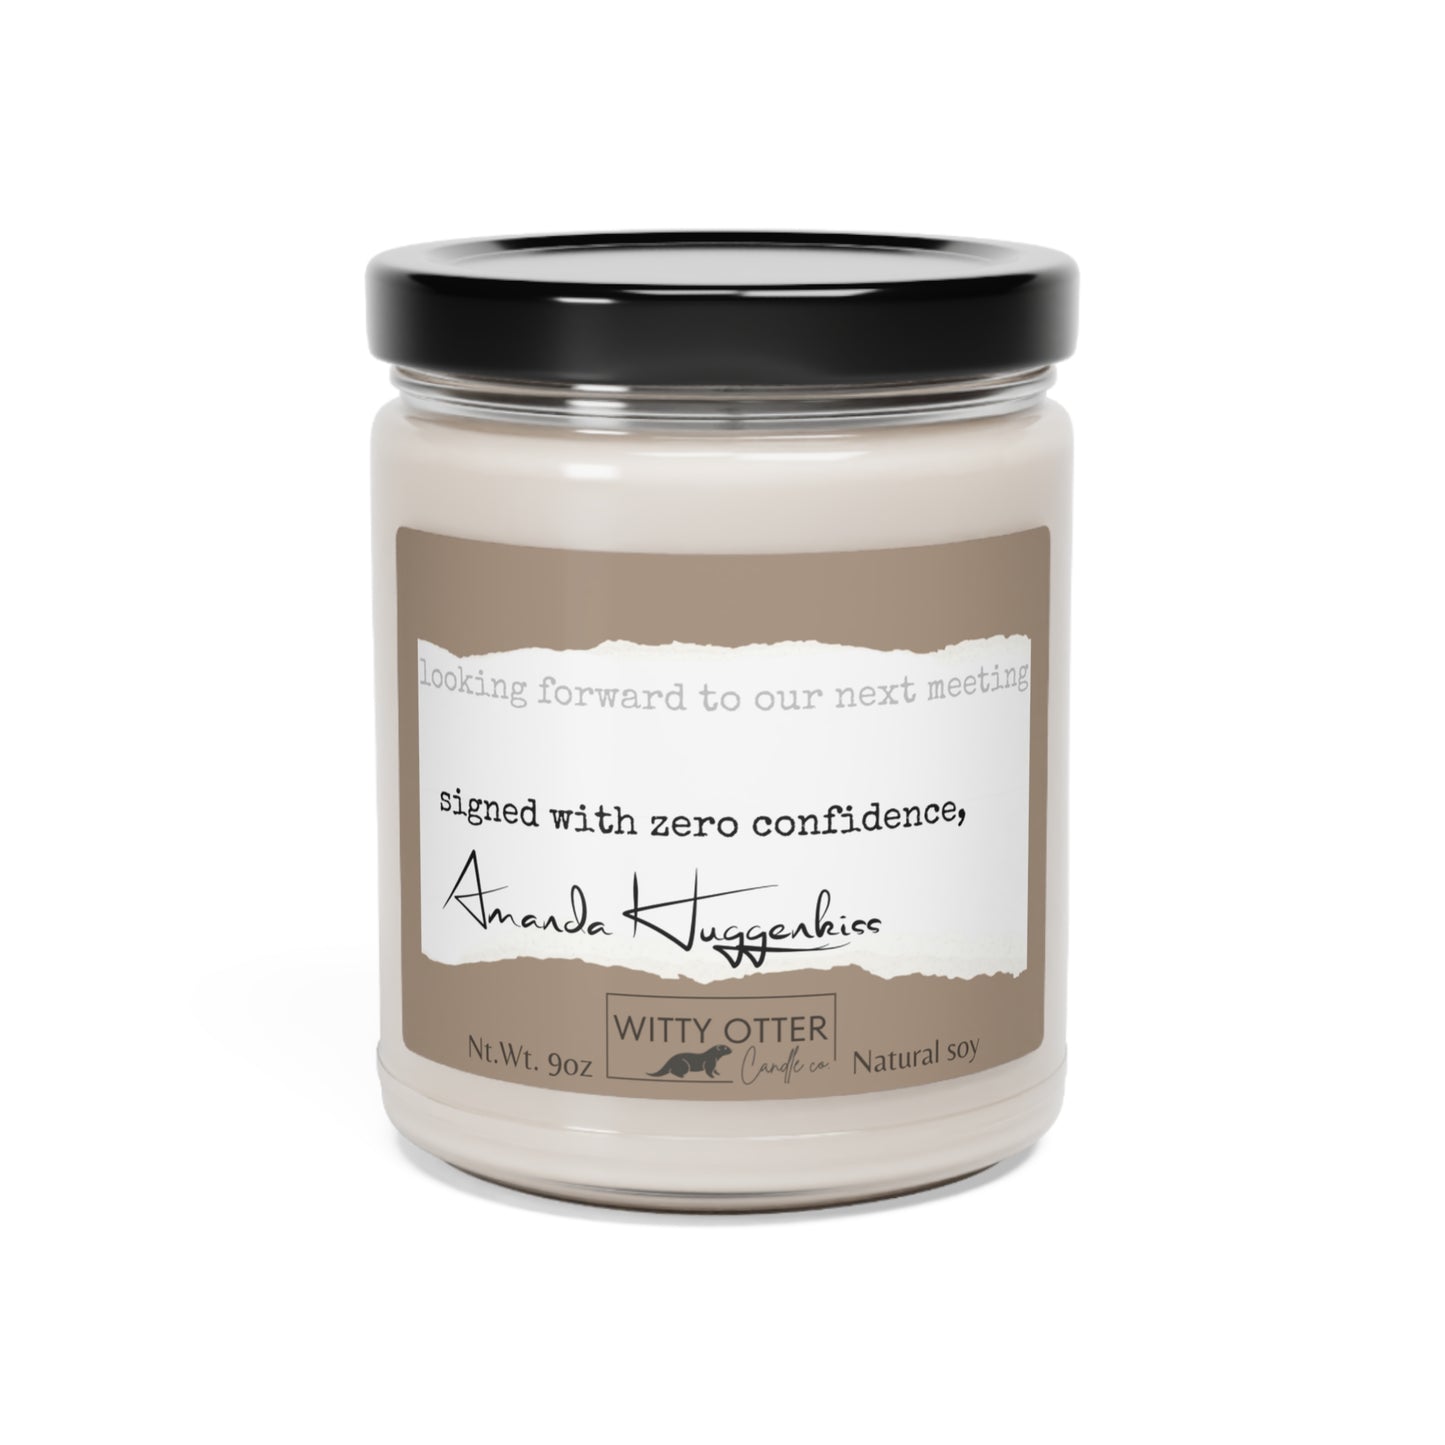 Hilarious office "signature" scented Soy Candle, 9oz - "Zero confidence" signed candle